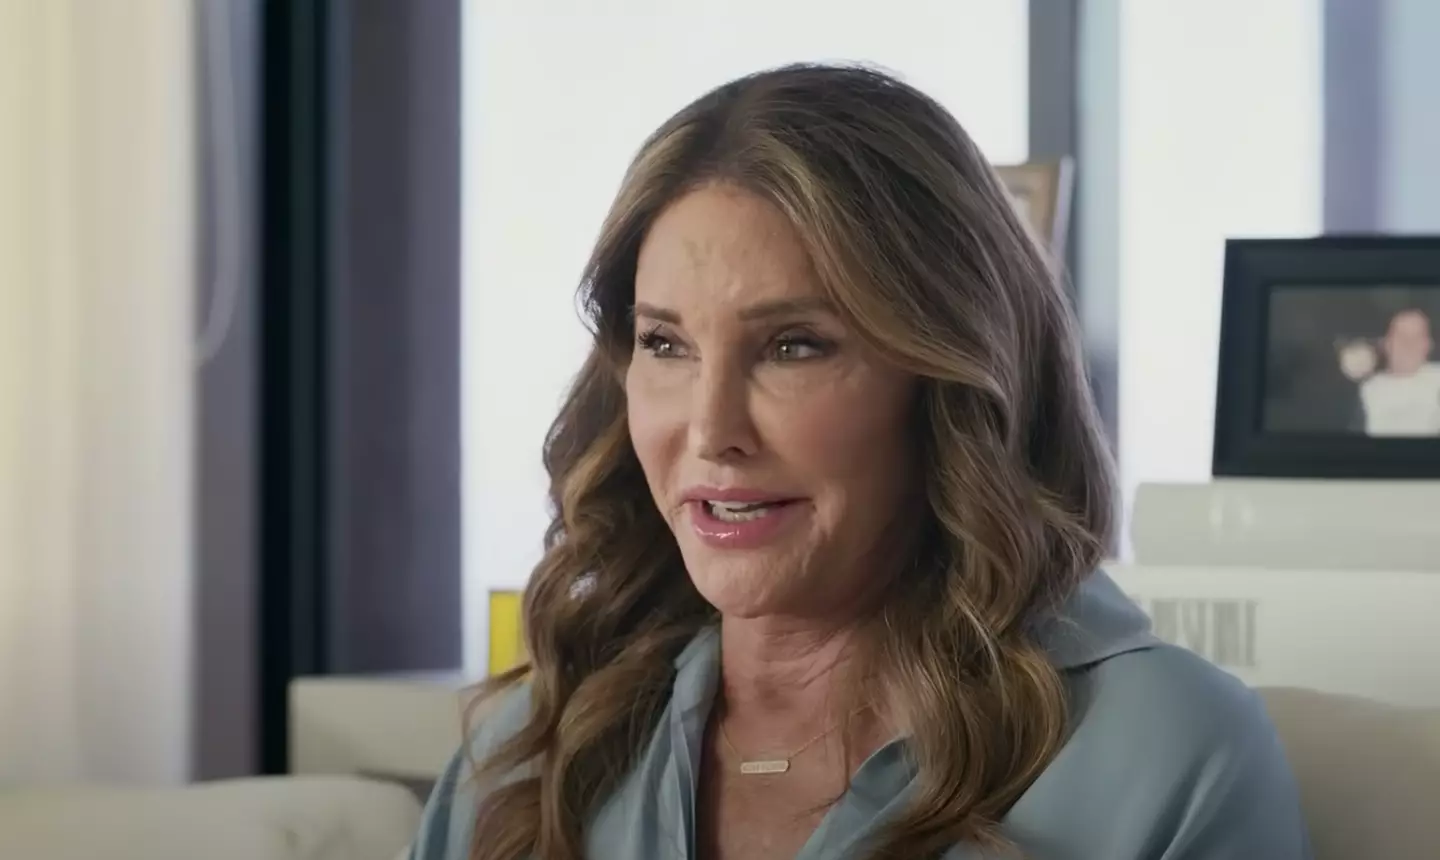 In the new documentary, Caitlyn Jenner recalls a conversation between Kris and Nicole a week before the murder.